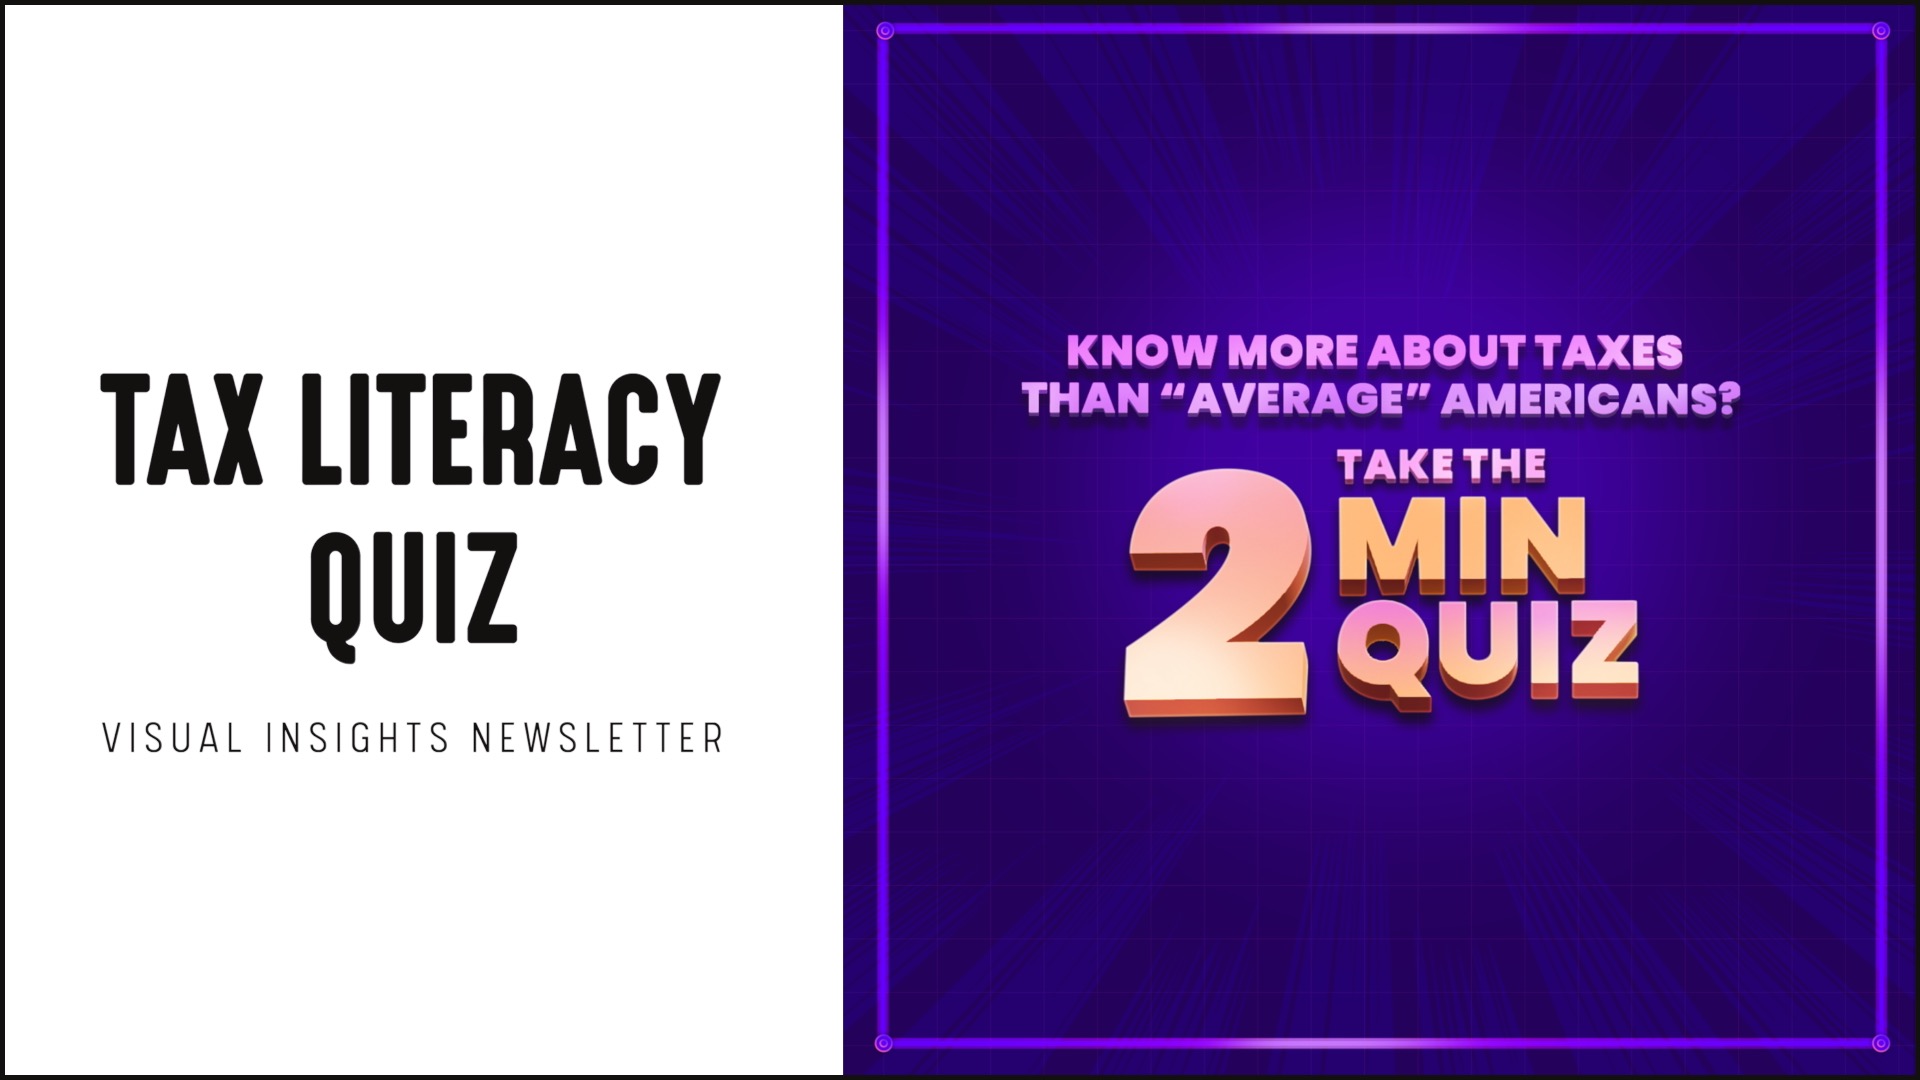 [NEW] Tax Literacy Quiz - Visual Insights Newsletter Marketing Campaigns for Financial Advisors